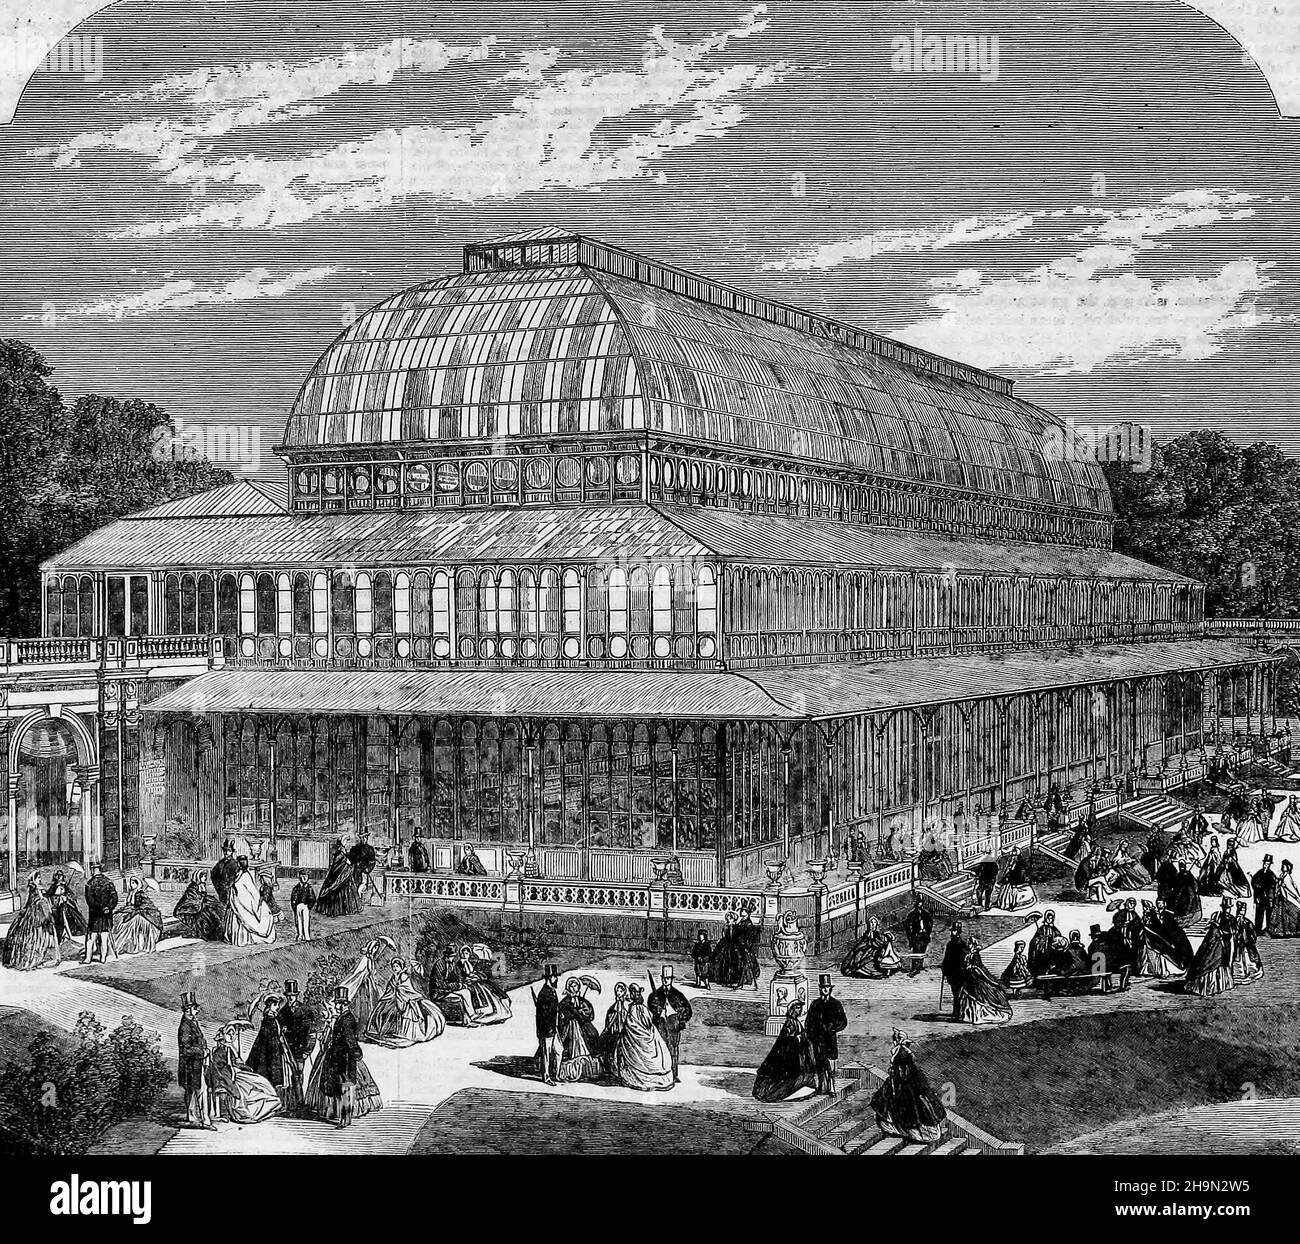 The Conservatory in the Royal Horticultural Society's Gardens, South Kensington, luglio 1861 Foto Stock